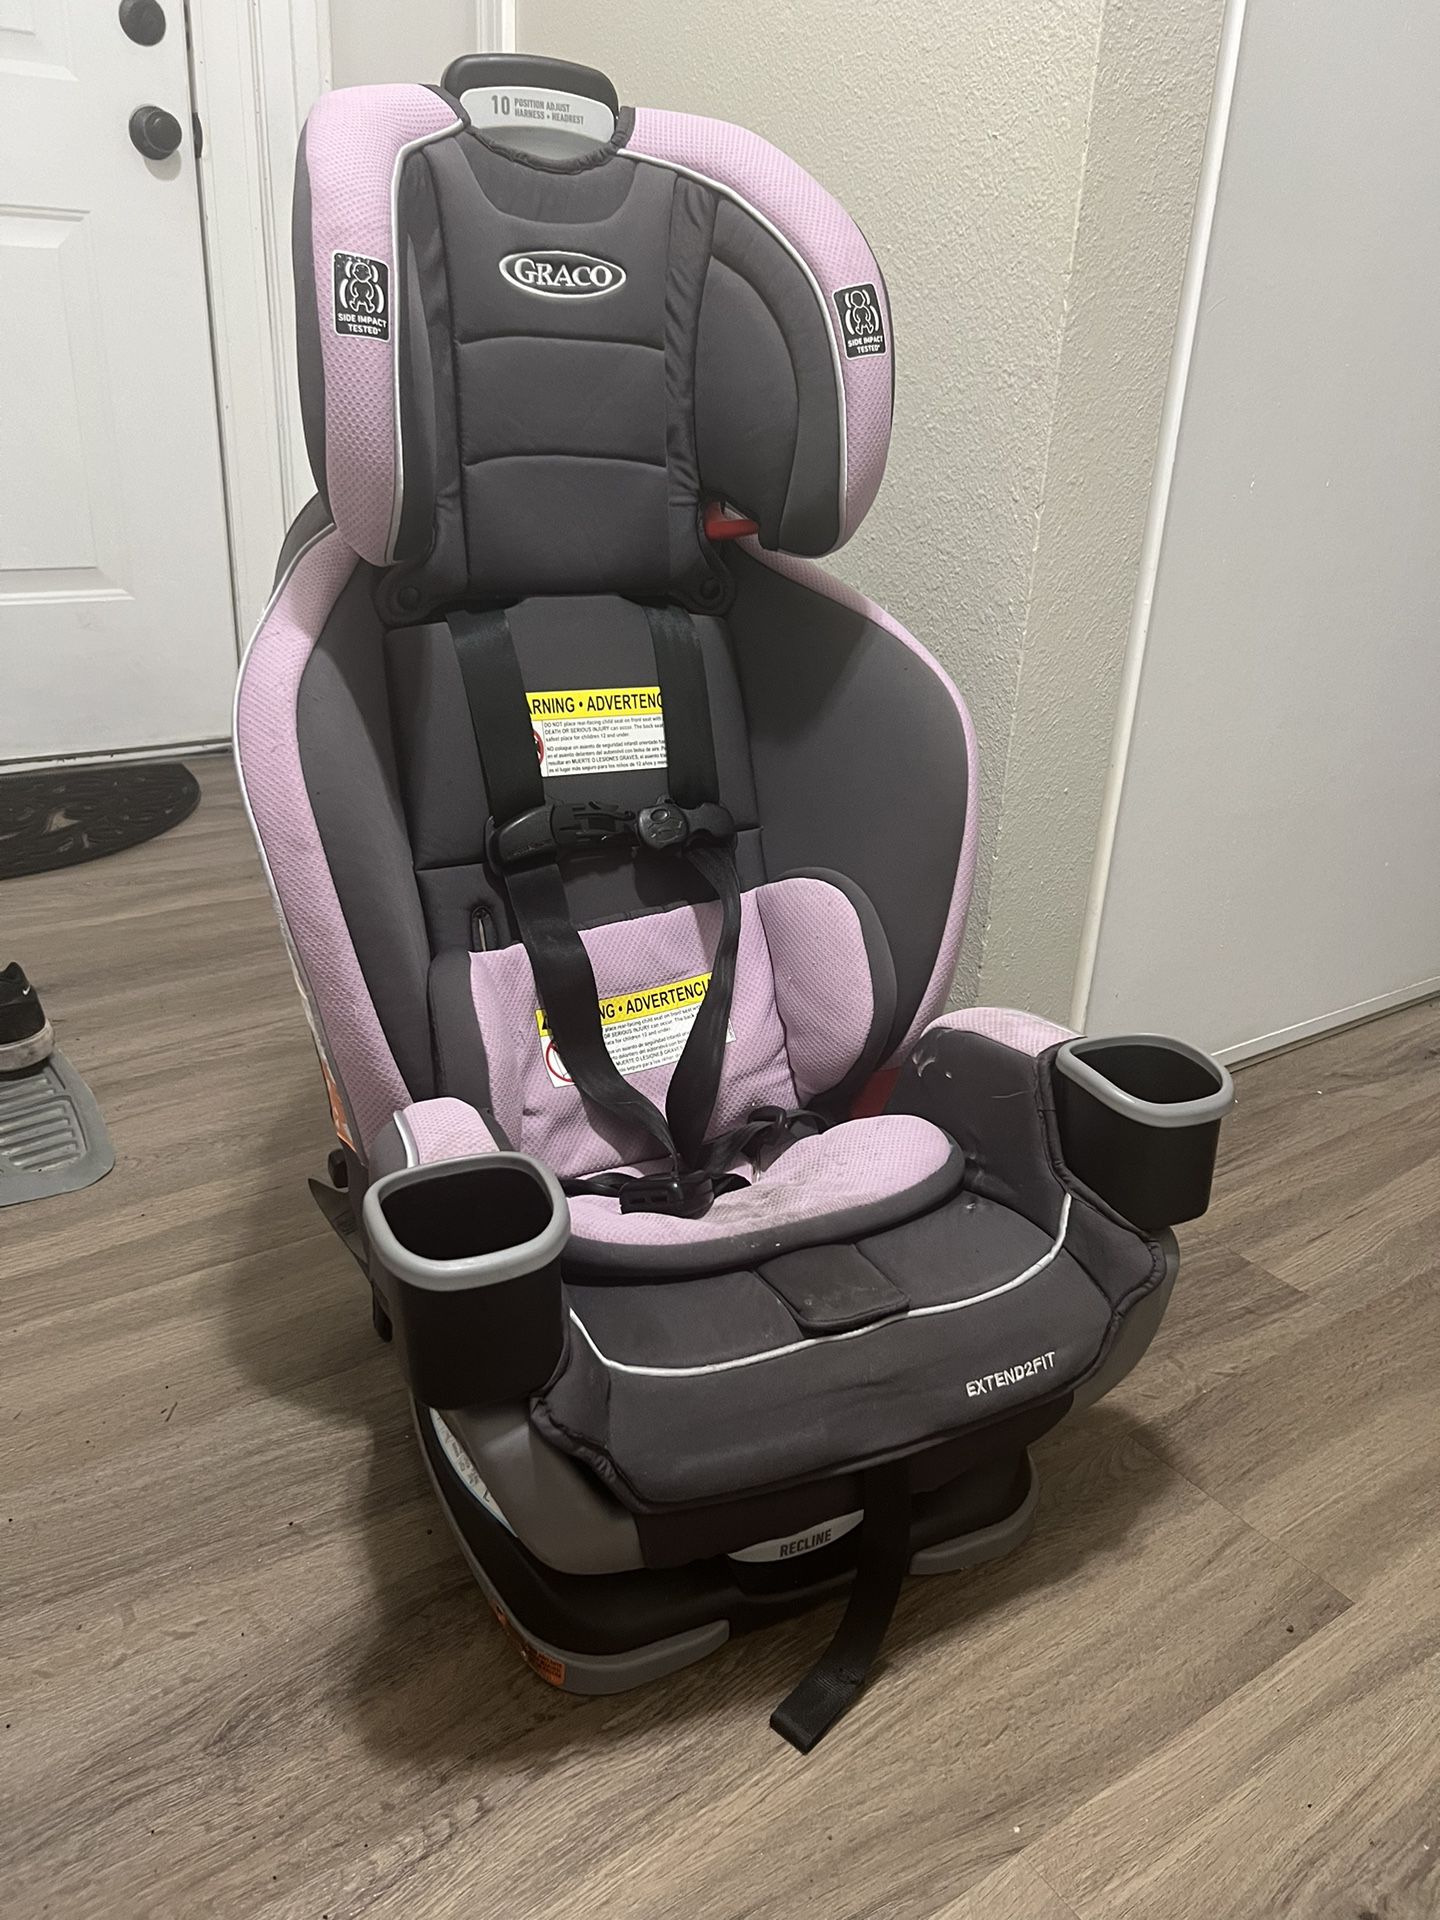 Graco Convertible Carseat Extend2Fit Car Seat